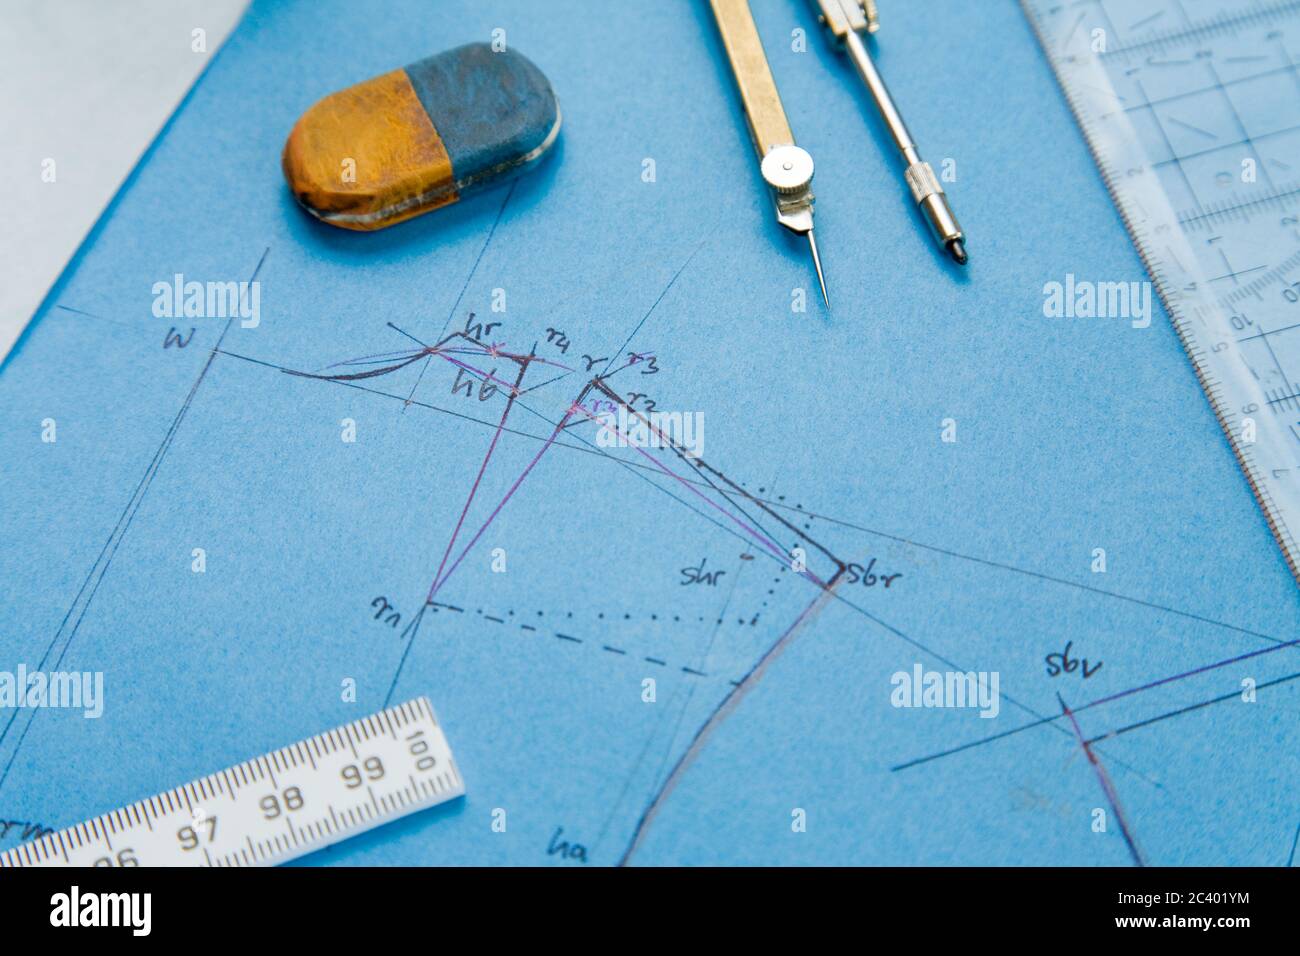 Details of a pattern with compass and eraser Stock Photo